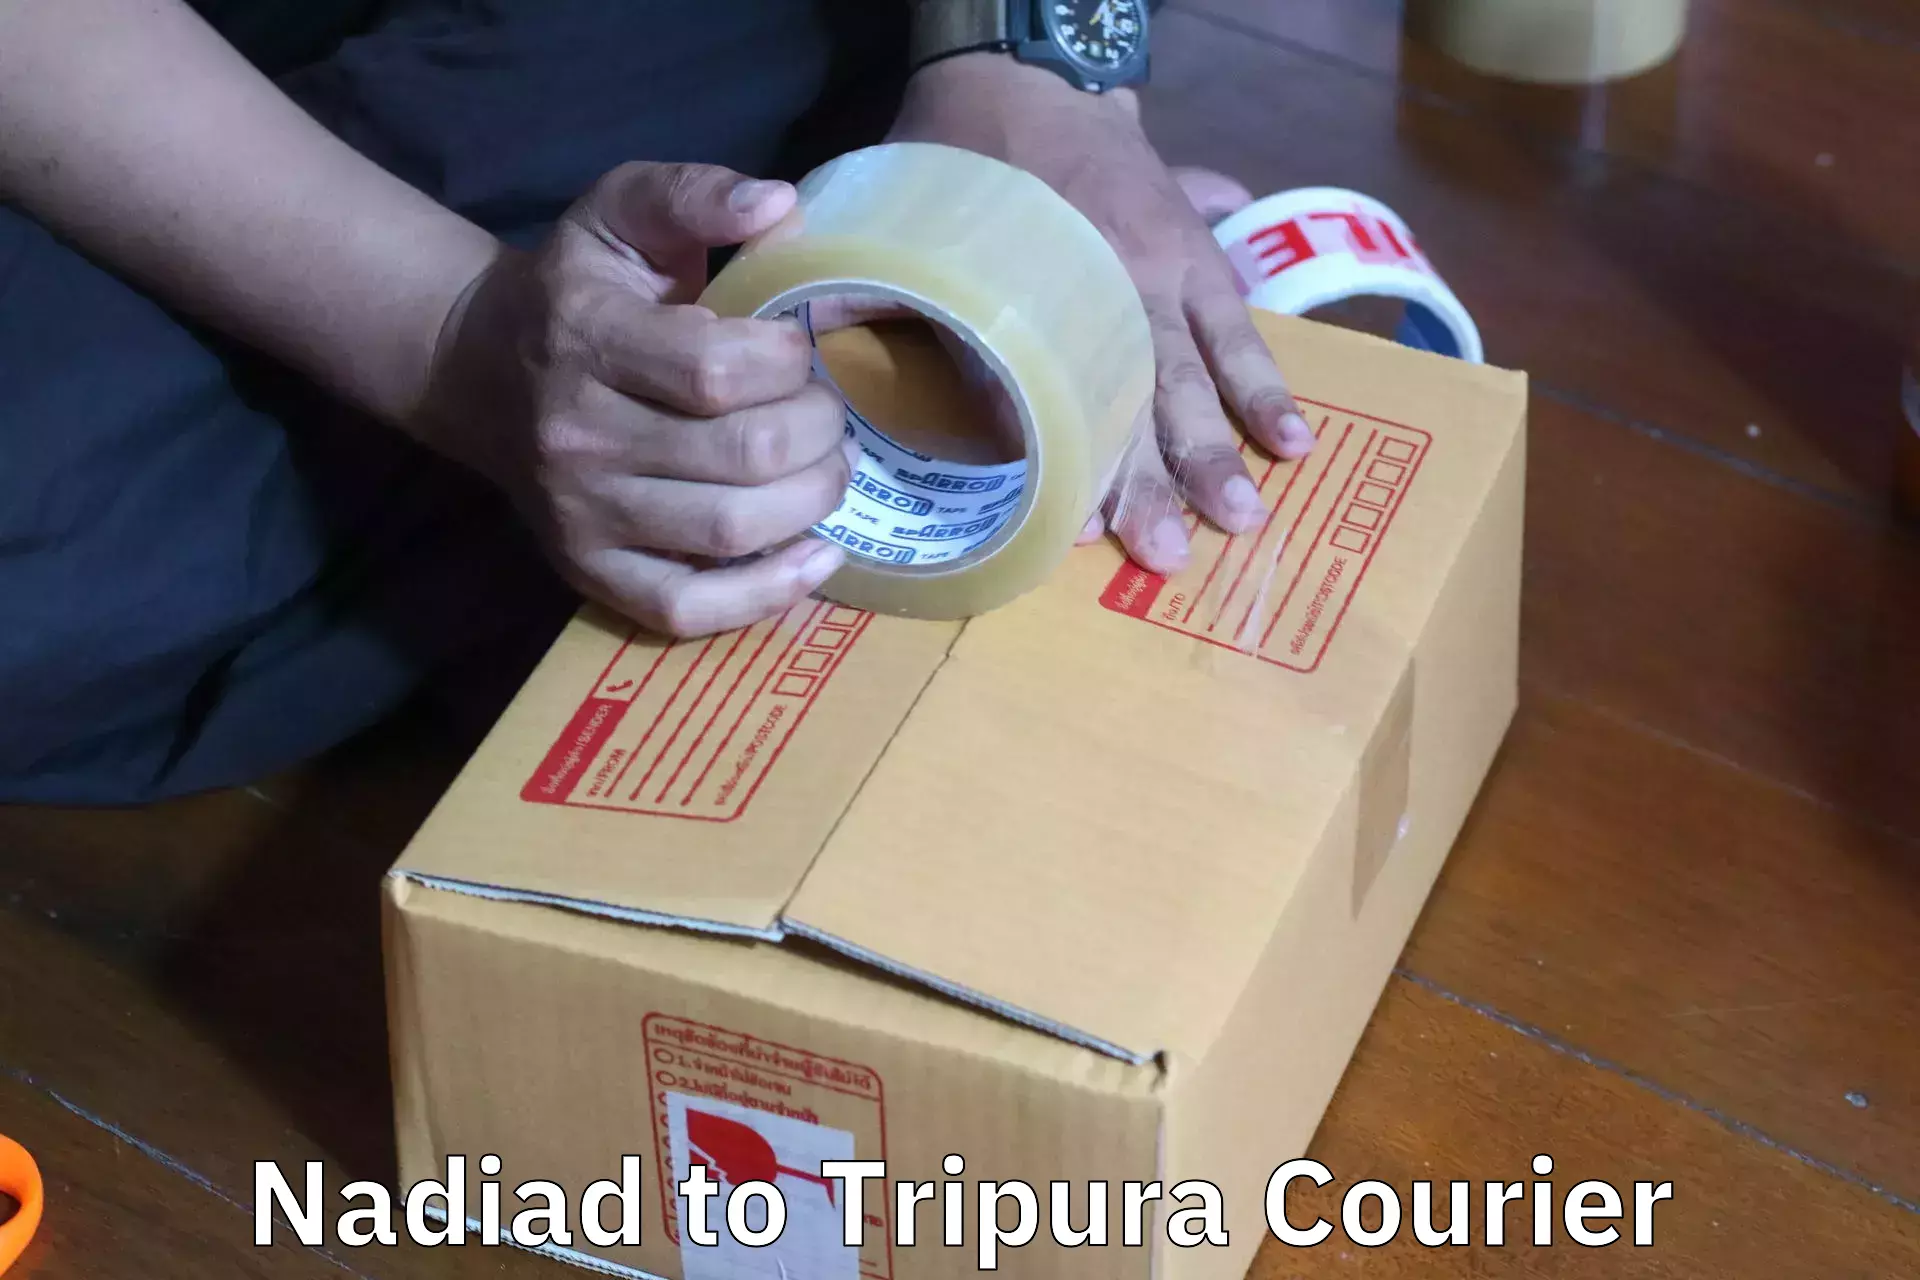 Furniture delivery service Nadiad to Tripura